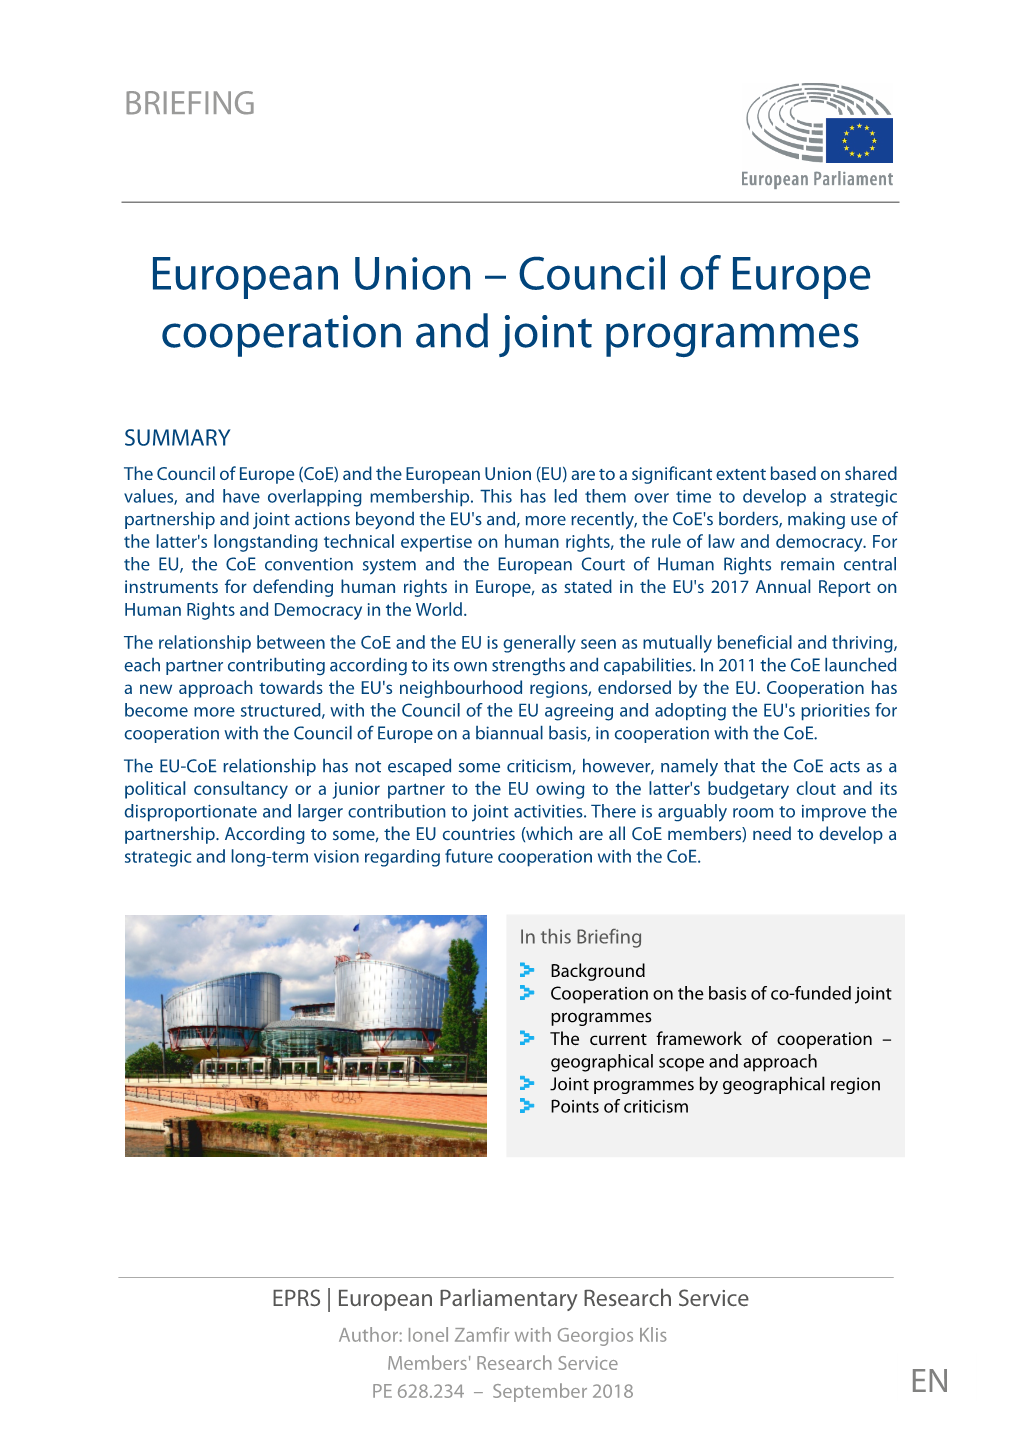 European Union – Council of Europe Cooperation and Joint Programmes